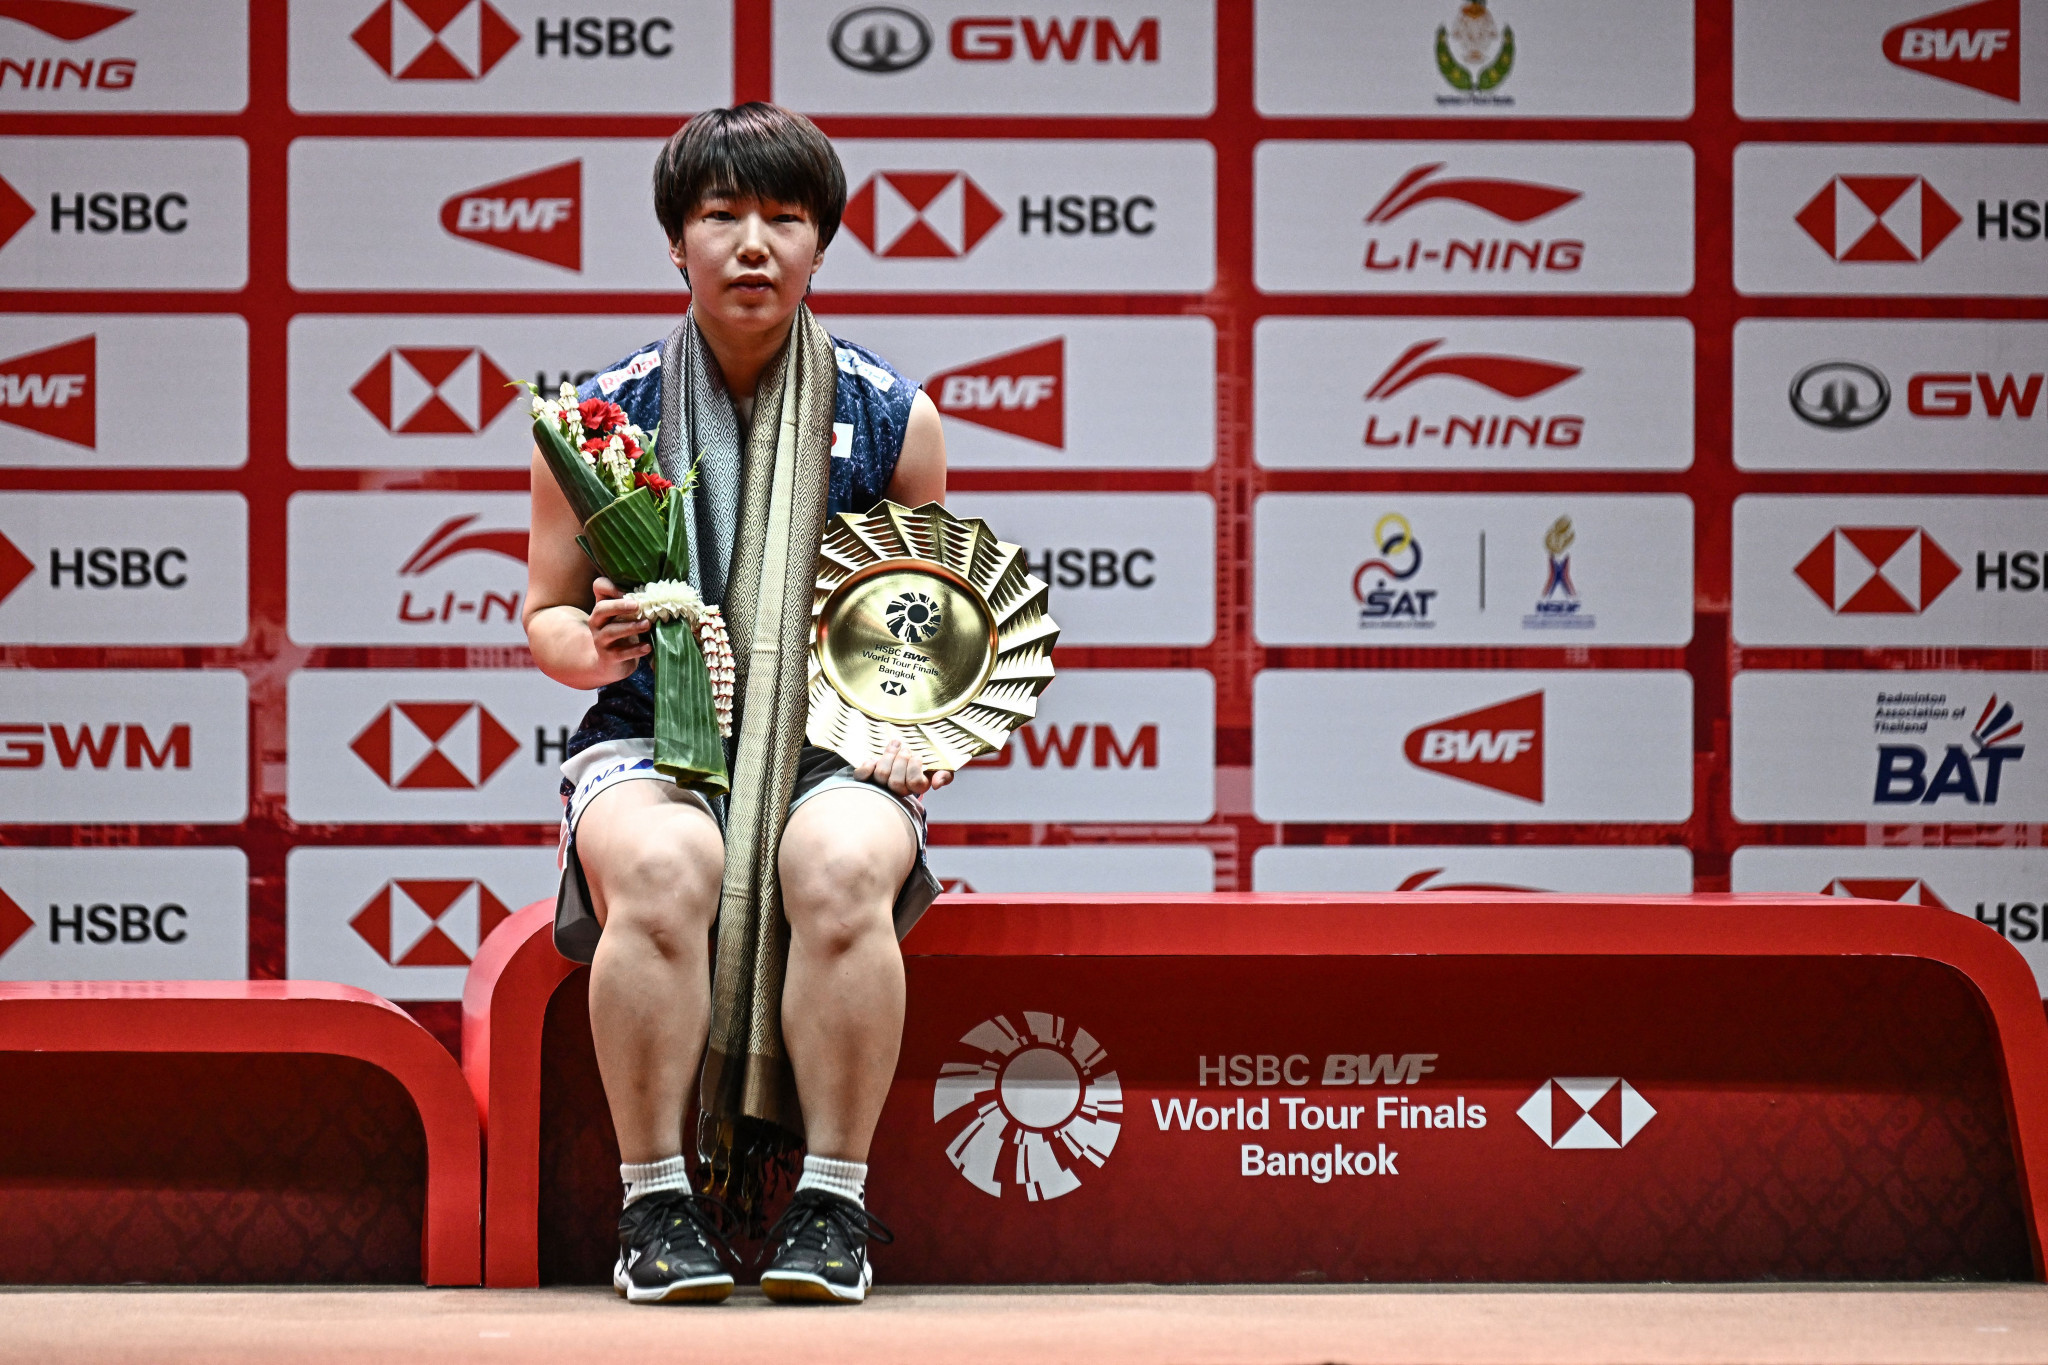 Japan's Akane Amaguchi poses with the HSBC BWF World Tour Finals trophy after her victory in the women's singles in Bangkok earlier this month ©Getty Images